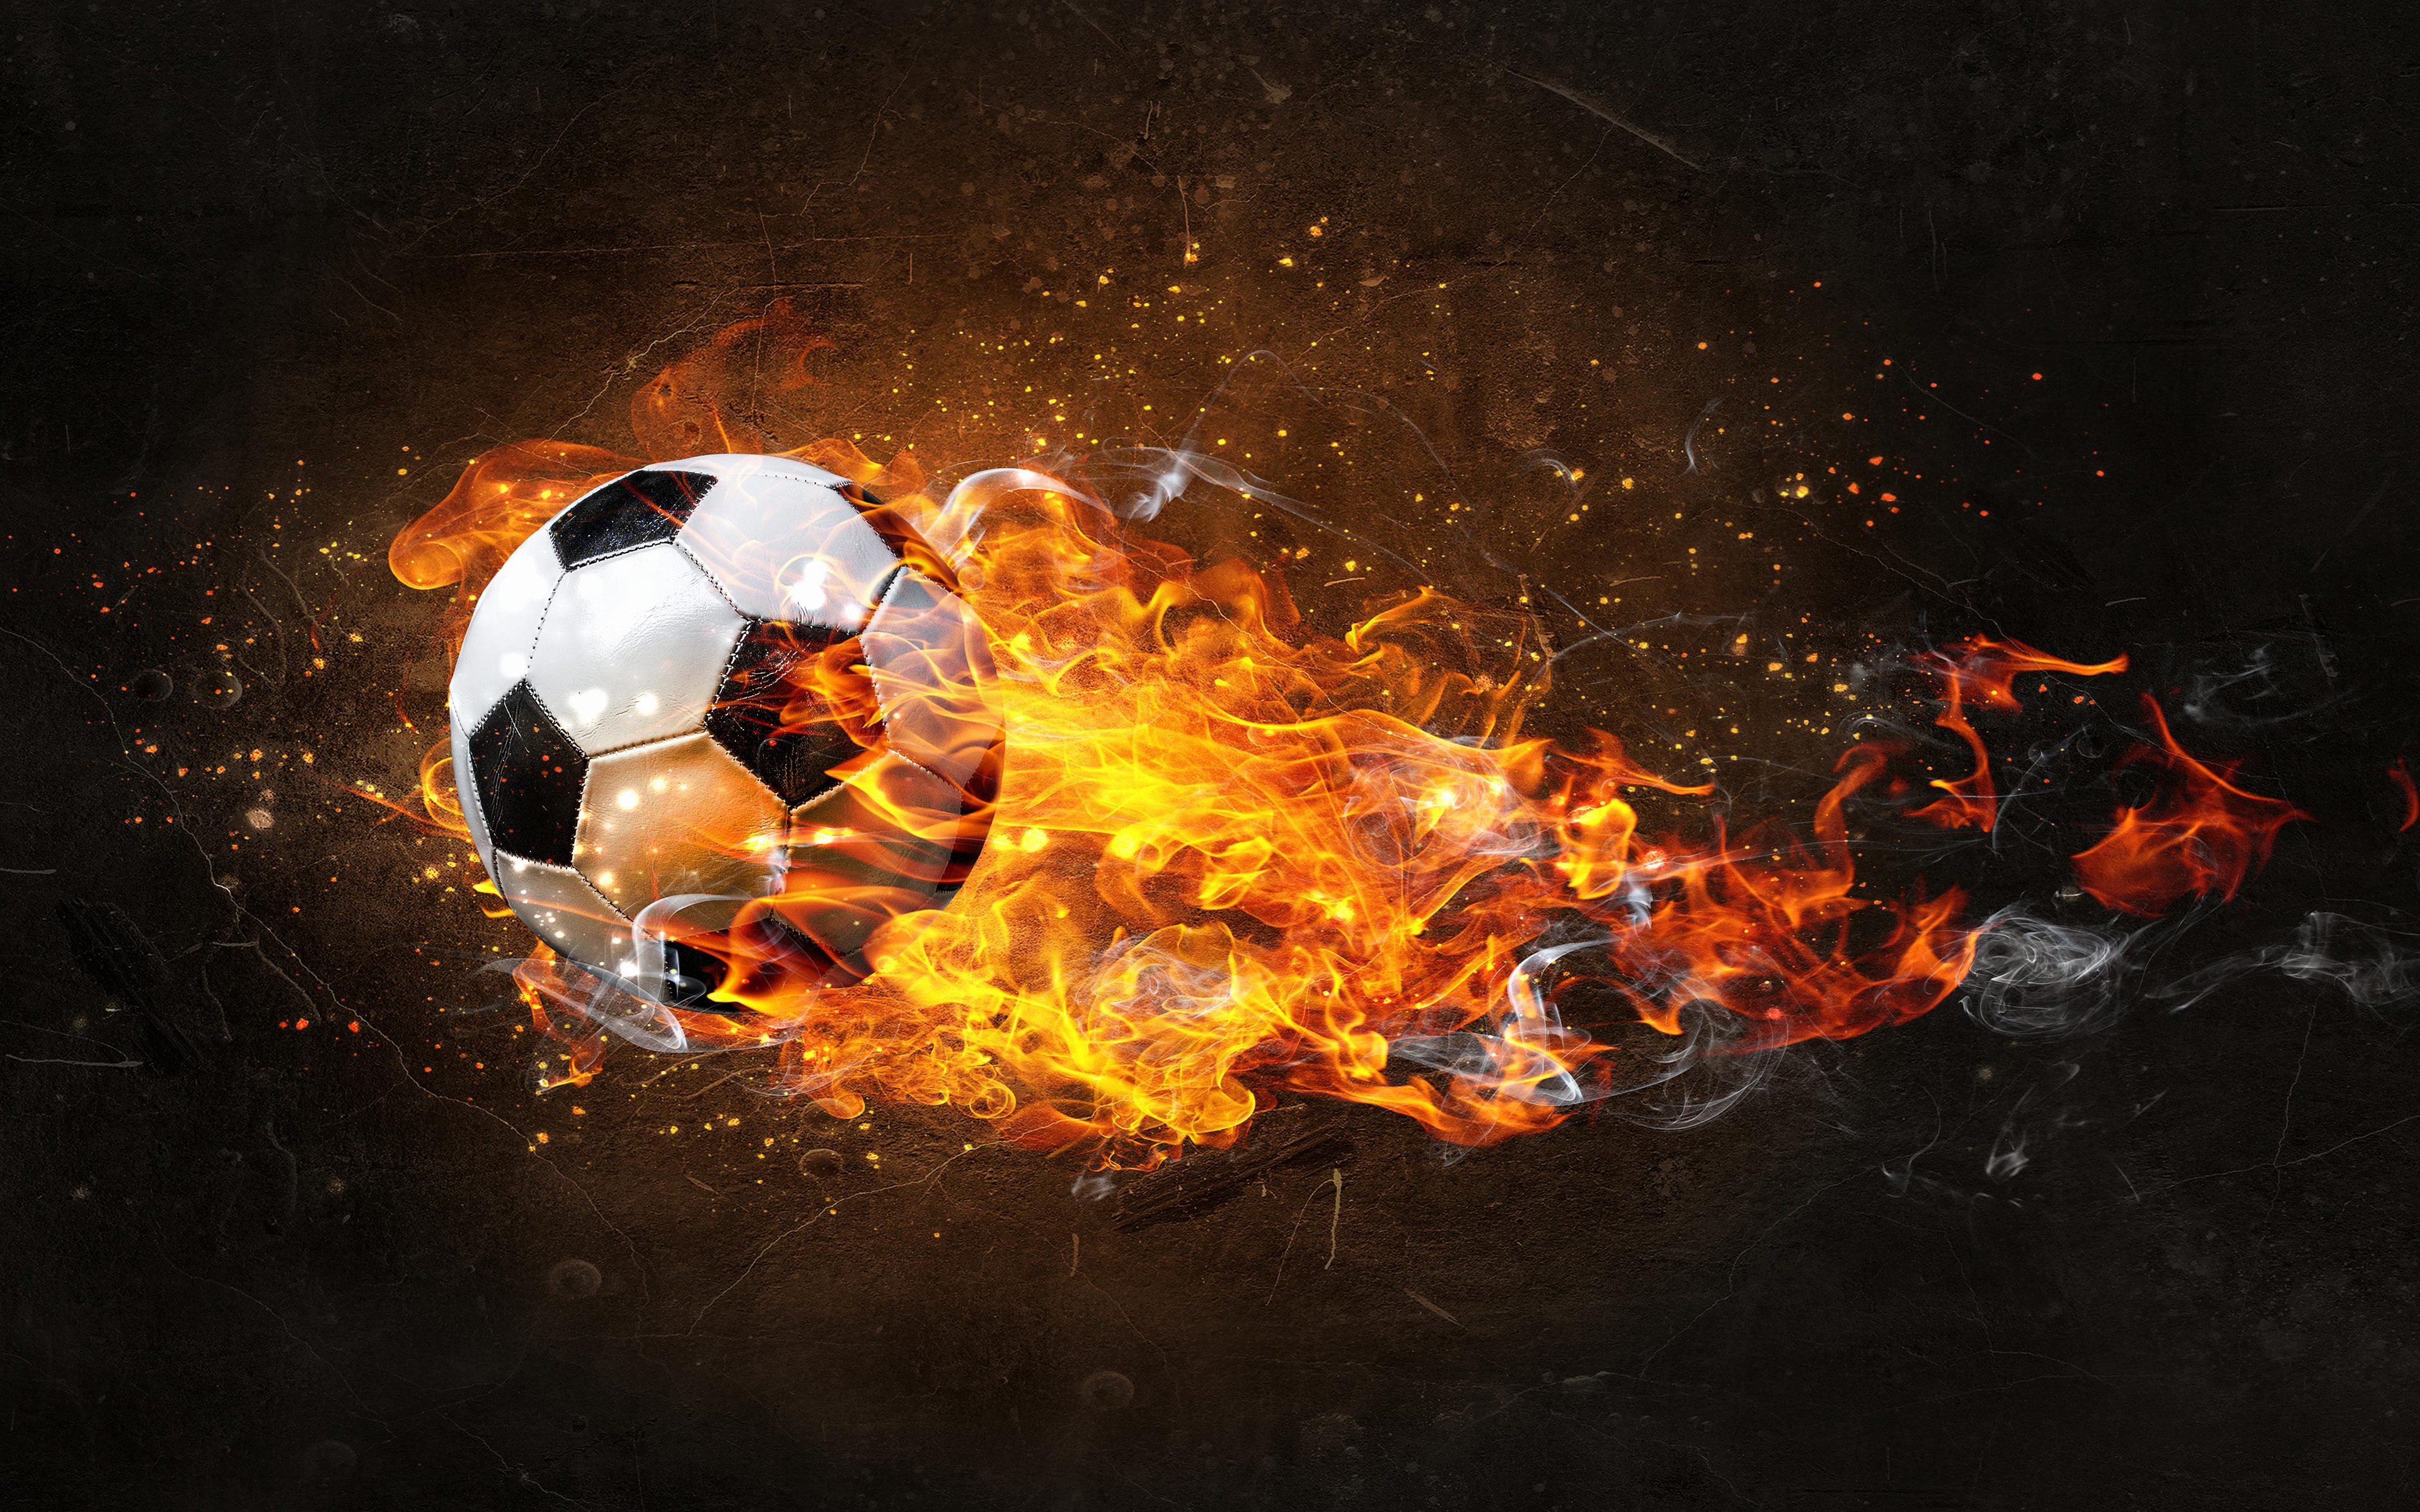 Download wallpaper ball in fire, 4k, flying ball, flame of fire, creative, football, soccer ball, fire with ball for desktop with resolution 3840x2400. High Quality HD picture wallpaper